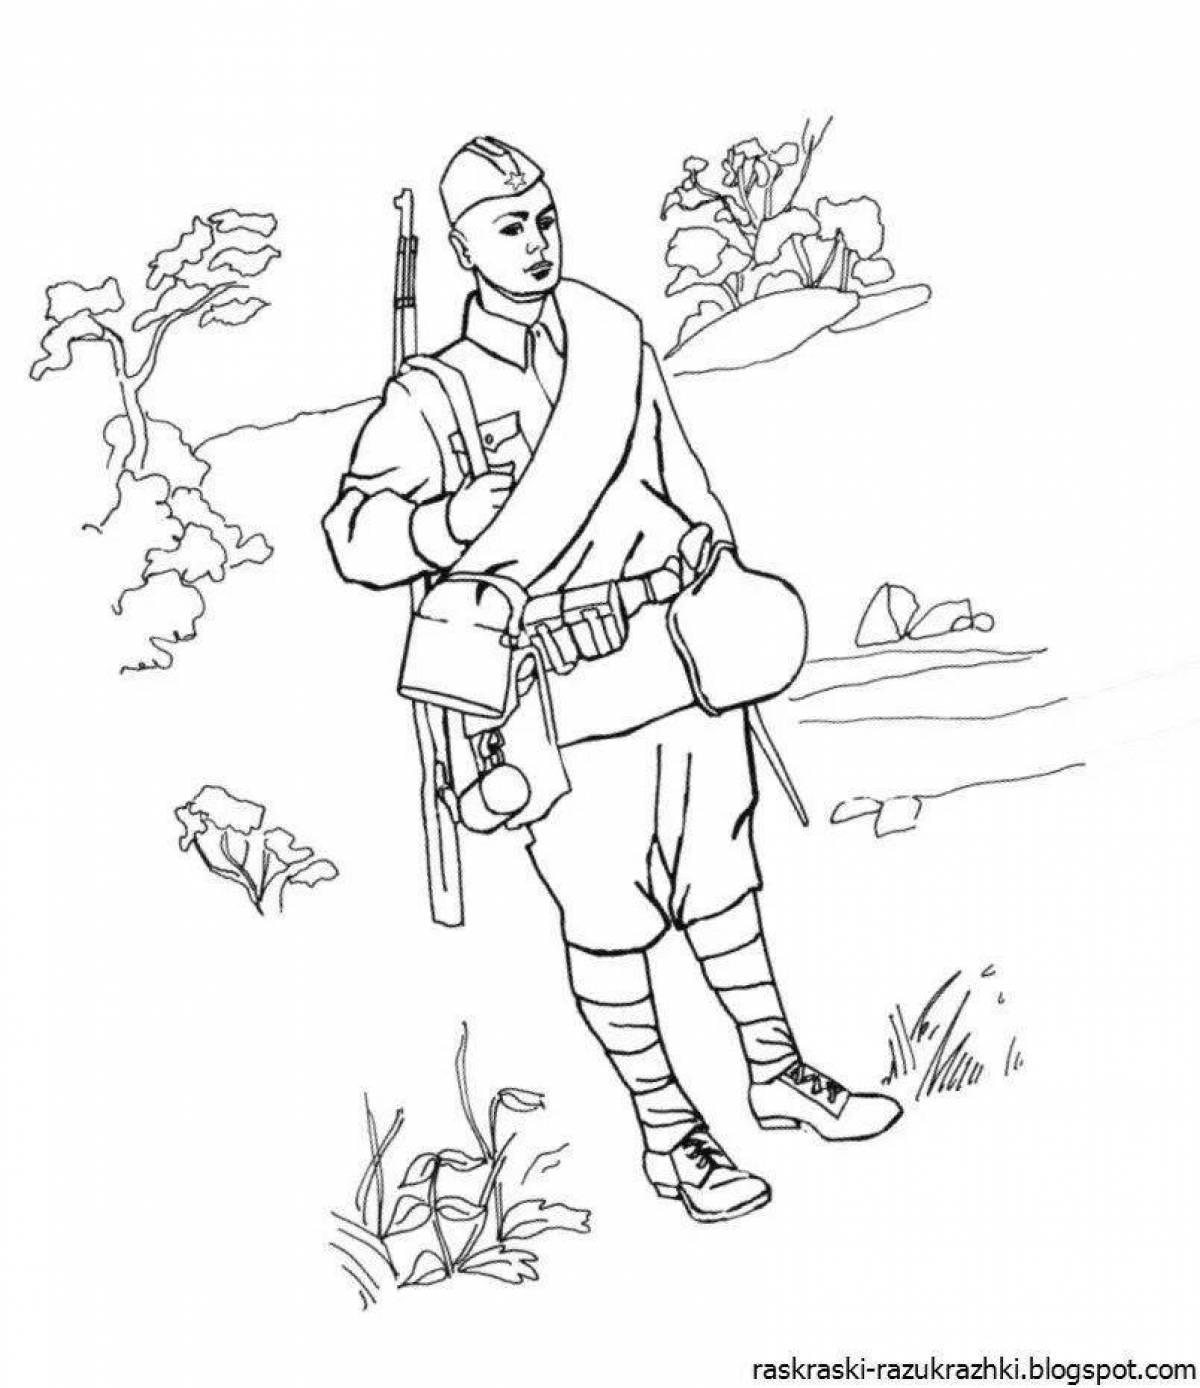 Attractive coloring pages of war heroes